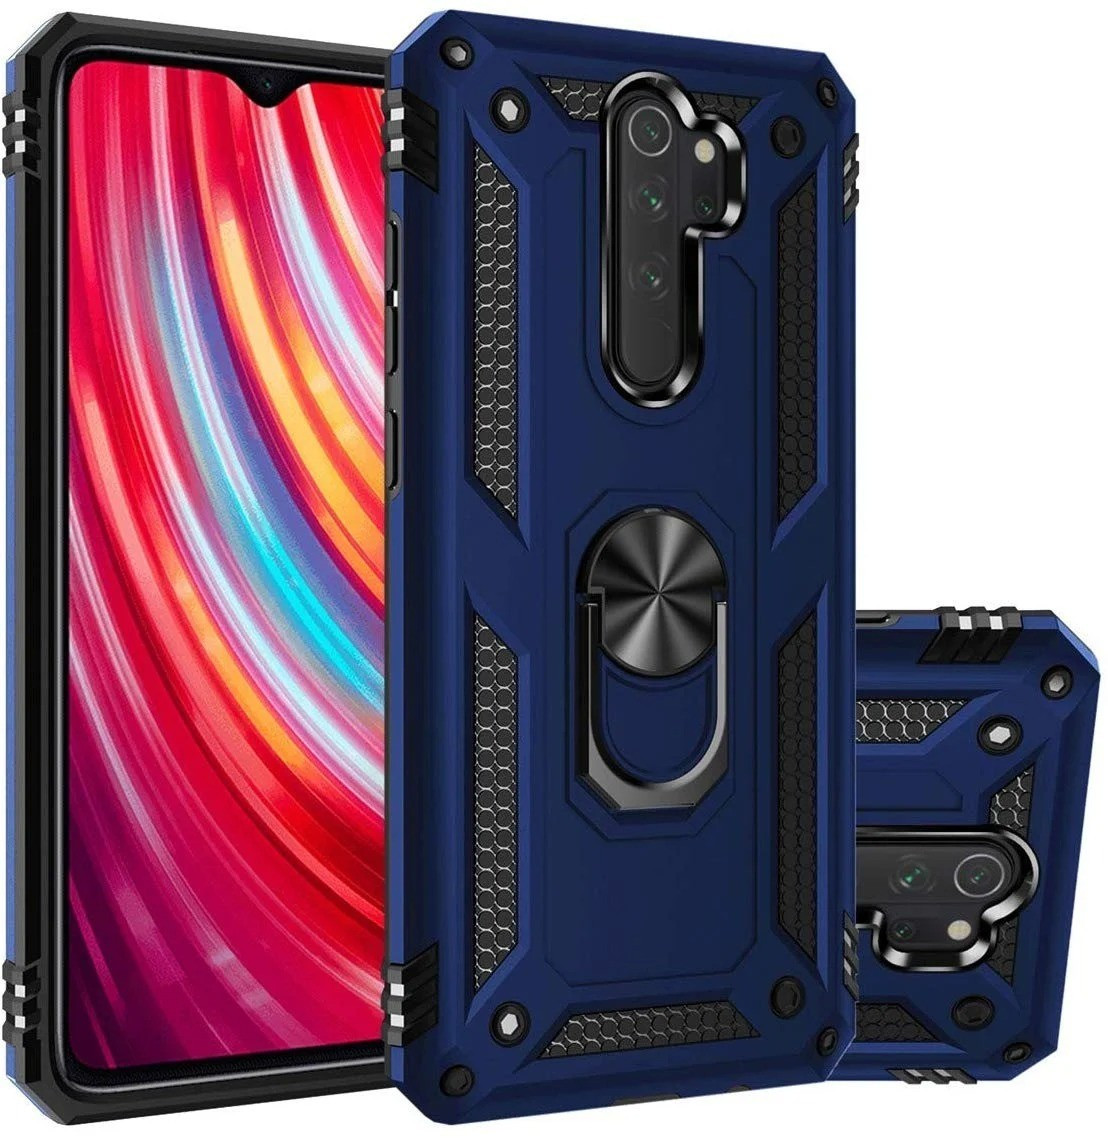 Chofit Intended for Xiaomi Band 8 Pro Case Cover,Hard PC India